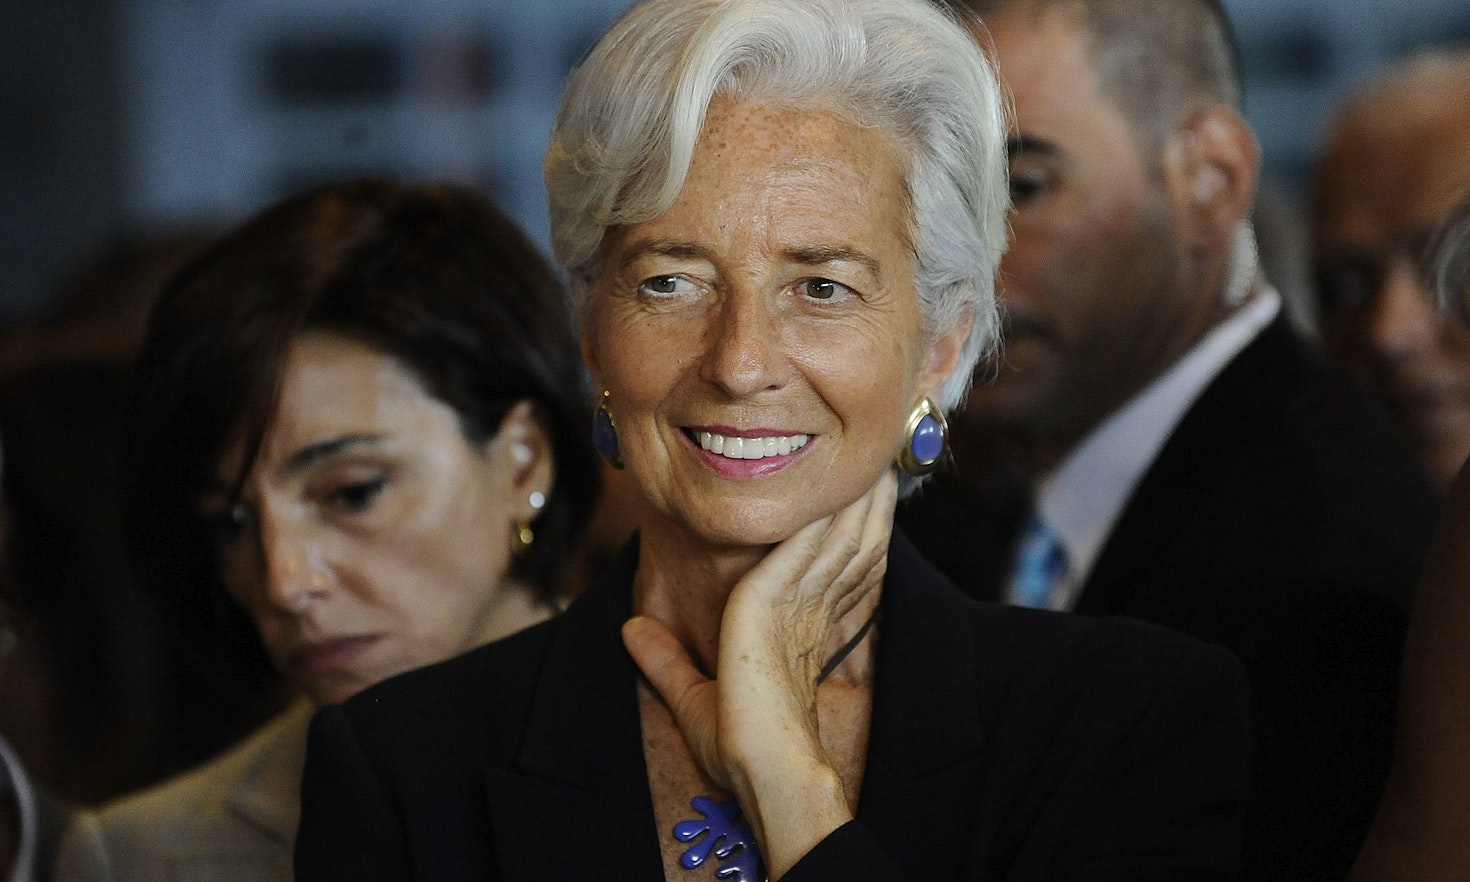 All the best, Mme Lagarde!